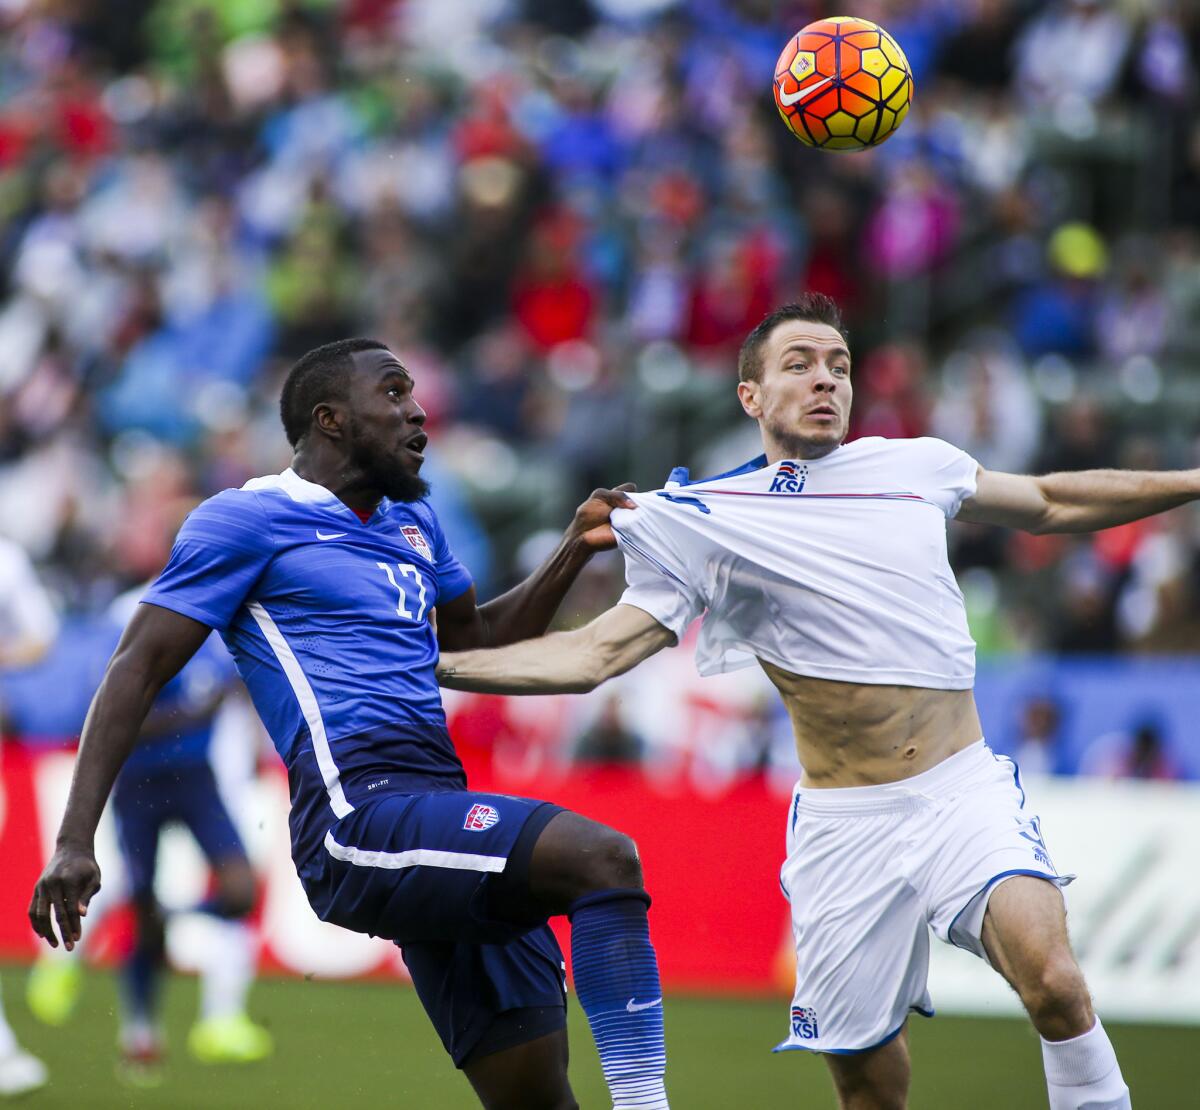 United States forward Jozy Altidore, left, and Iceland defender Jon Gudni Fjoluson battle for the ball in the first half of an international friendly soccer game in Carson, Calif., Sunday, Jan., 31, 2016. (AP Photo/Ringo H.W. Chiu)